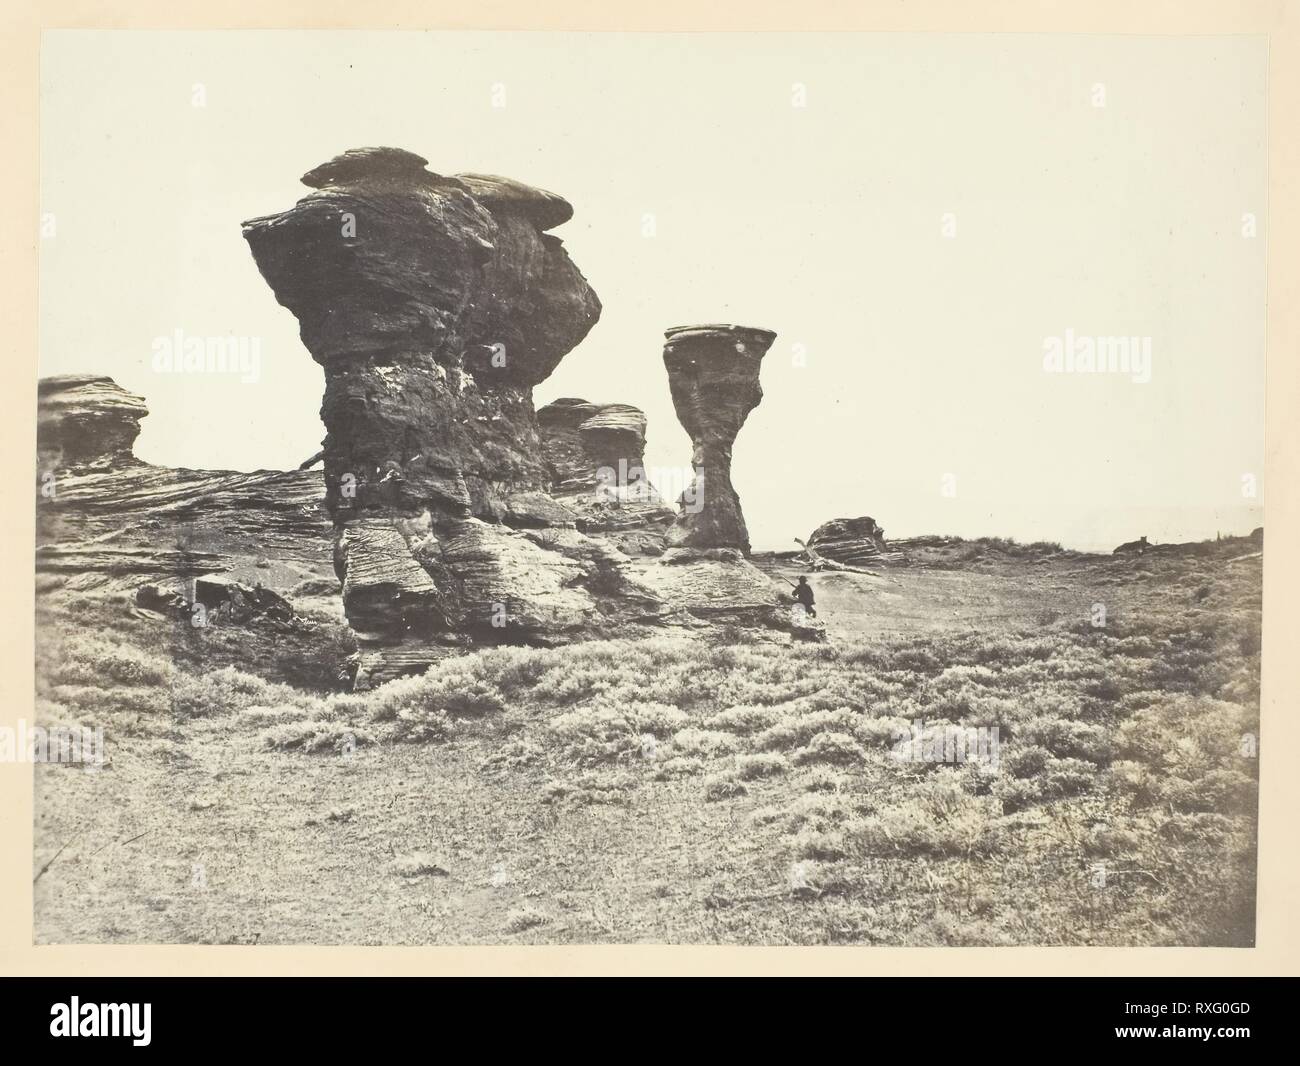 Dial Rock, Red Buttes, Laramie Plains. Andrew J. Russell; American, 1830-1902. Date: 1968-1969. Dimensions: 15.3 x 20.4 cm (image/paper); 23.3 x 30.4 cm (album page). Albumen print, pl. V from the album 'Sun Pictures of Rocky Mountain Scenery' (1870). Origin: United States. Museum: The Chicago Art Institute. Author: Andrew Joseph Russell. Stock Photo